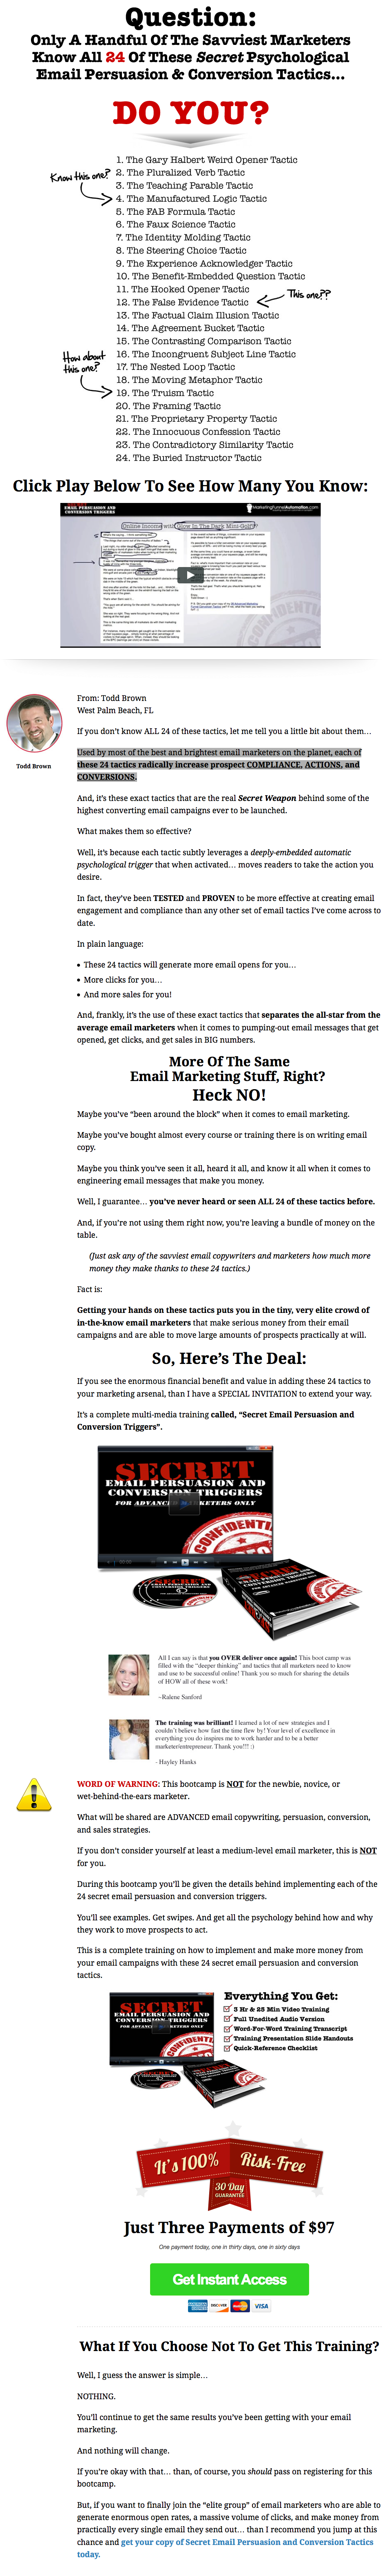 secret-email-persuasion-and-conversion-triggers2